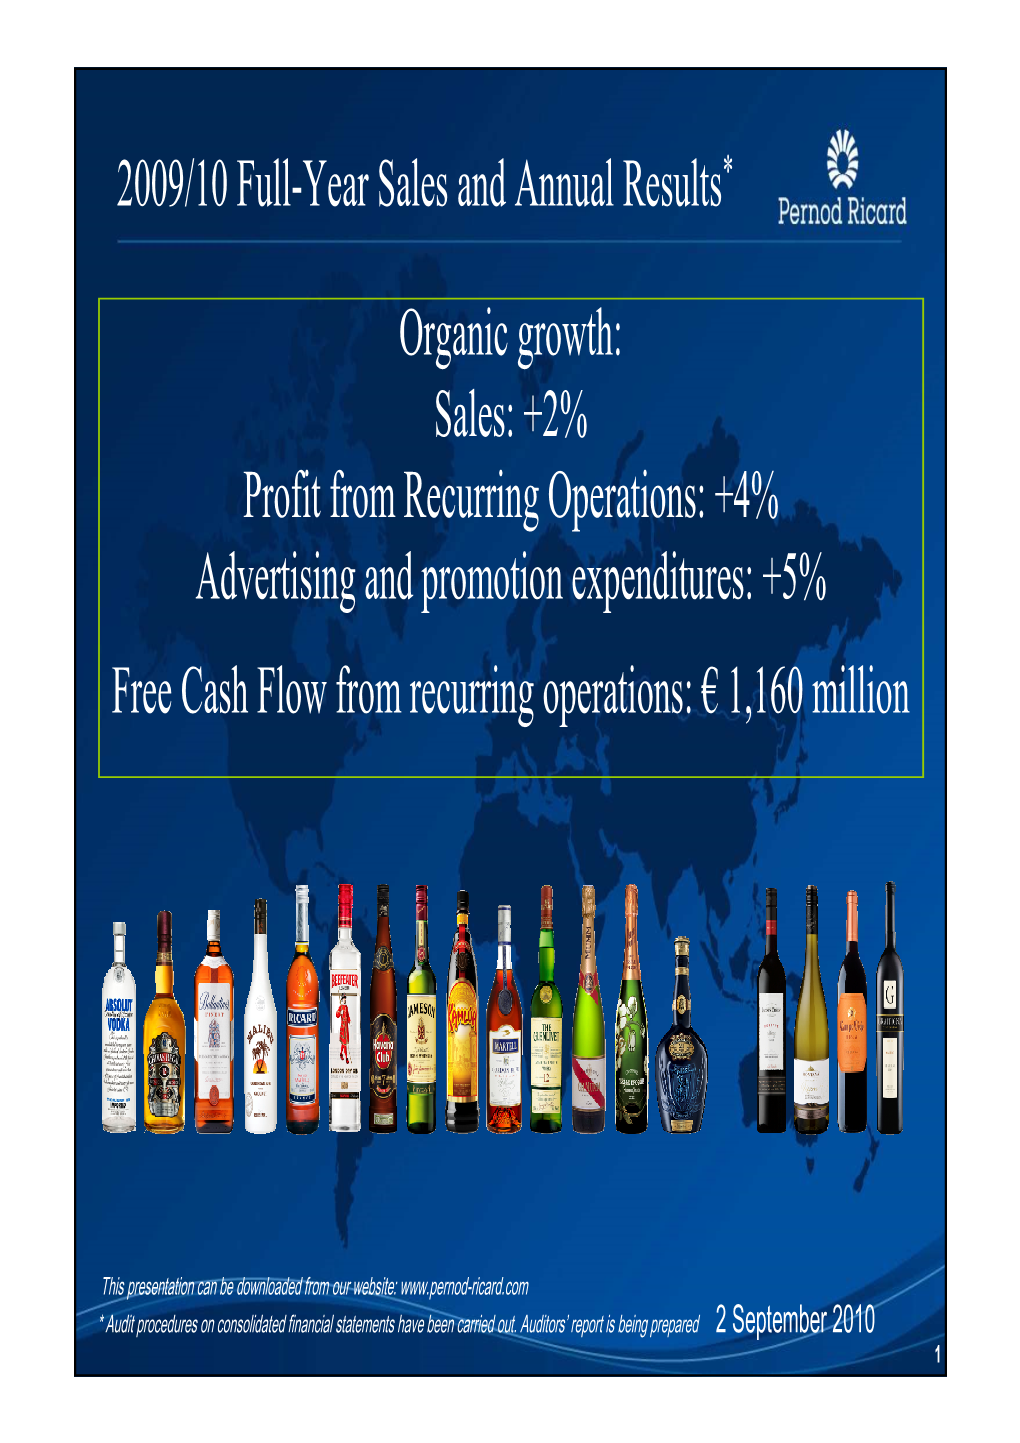 Pernod Ricard 2009 2010 Sales and Results